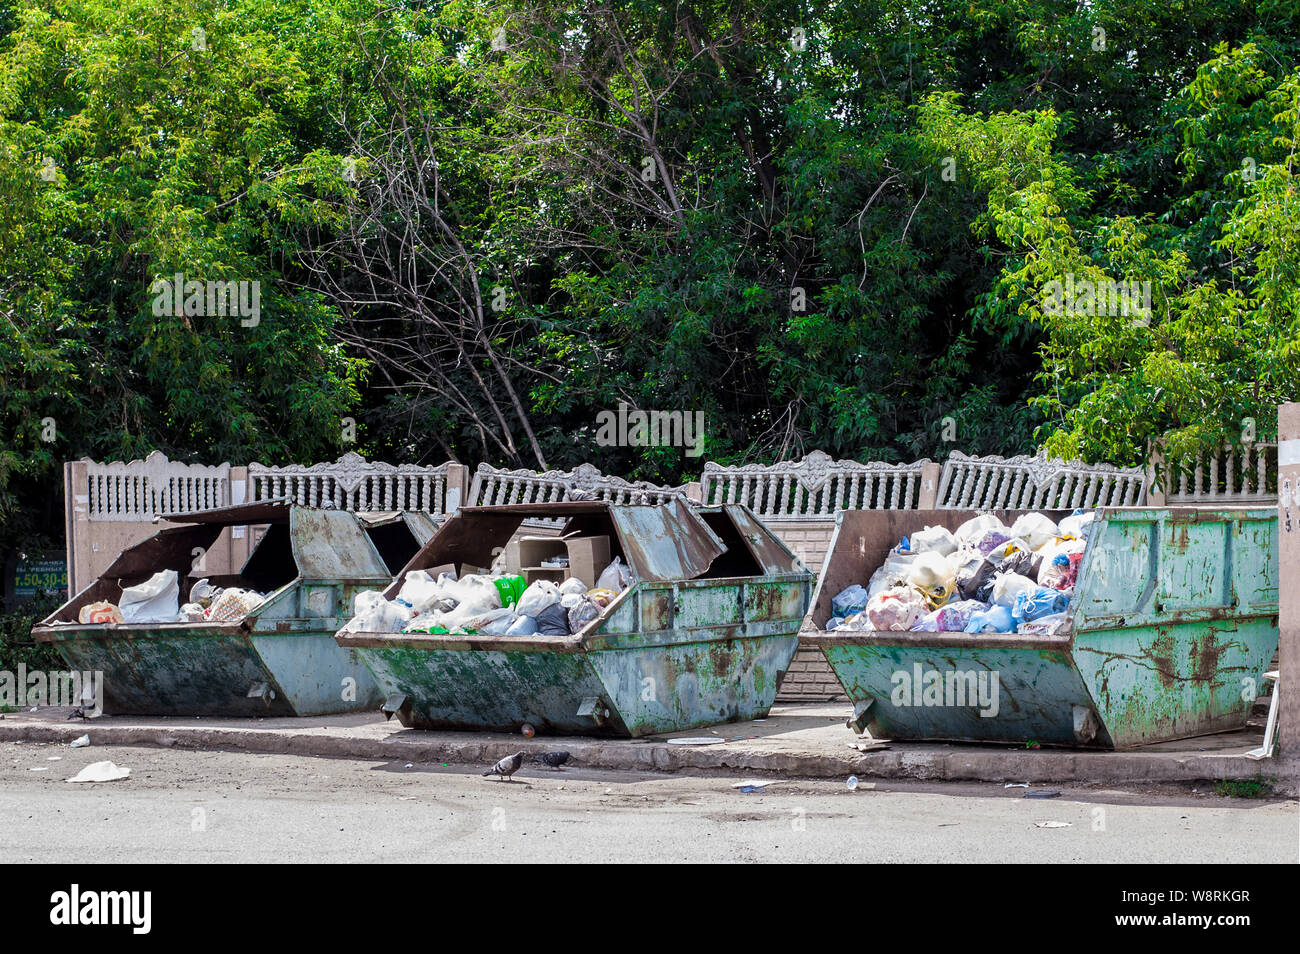 Full trash bins in a city. Garbage cans in a town Stock Photo